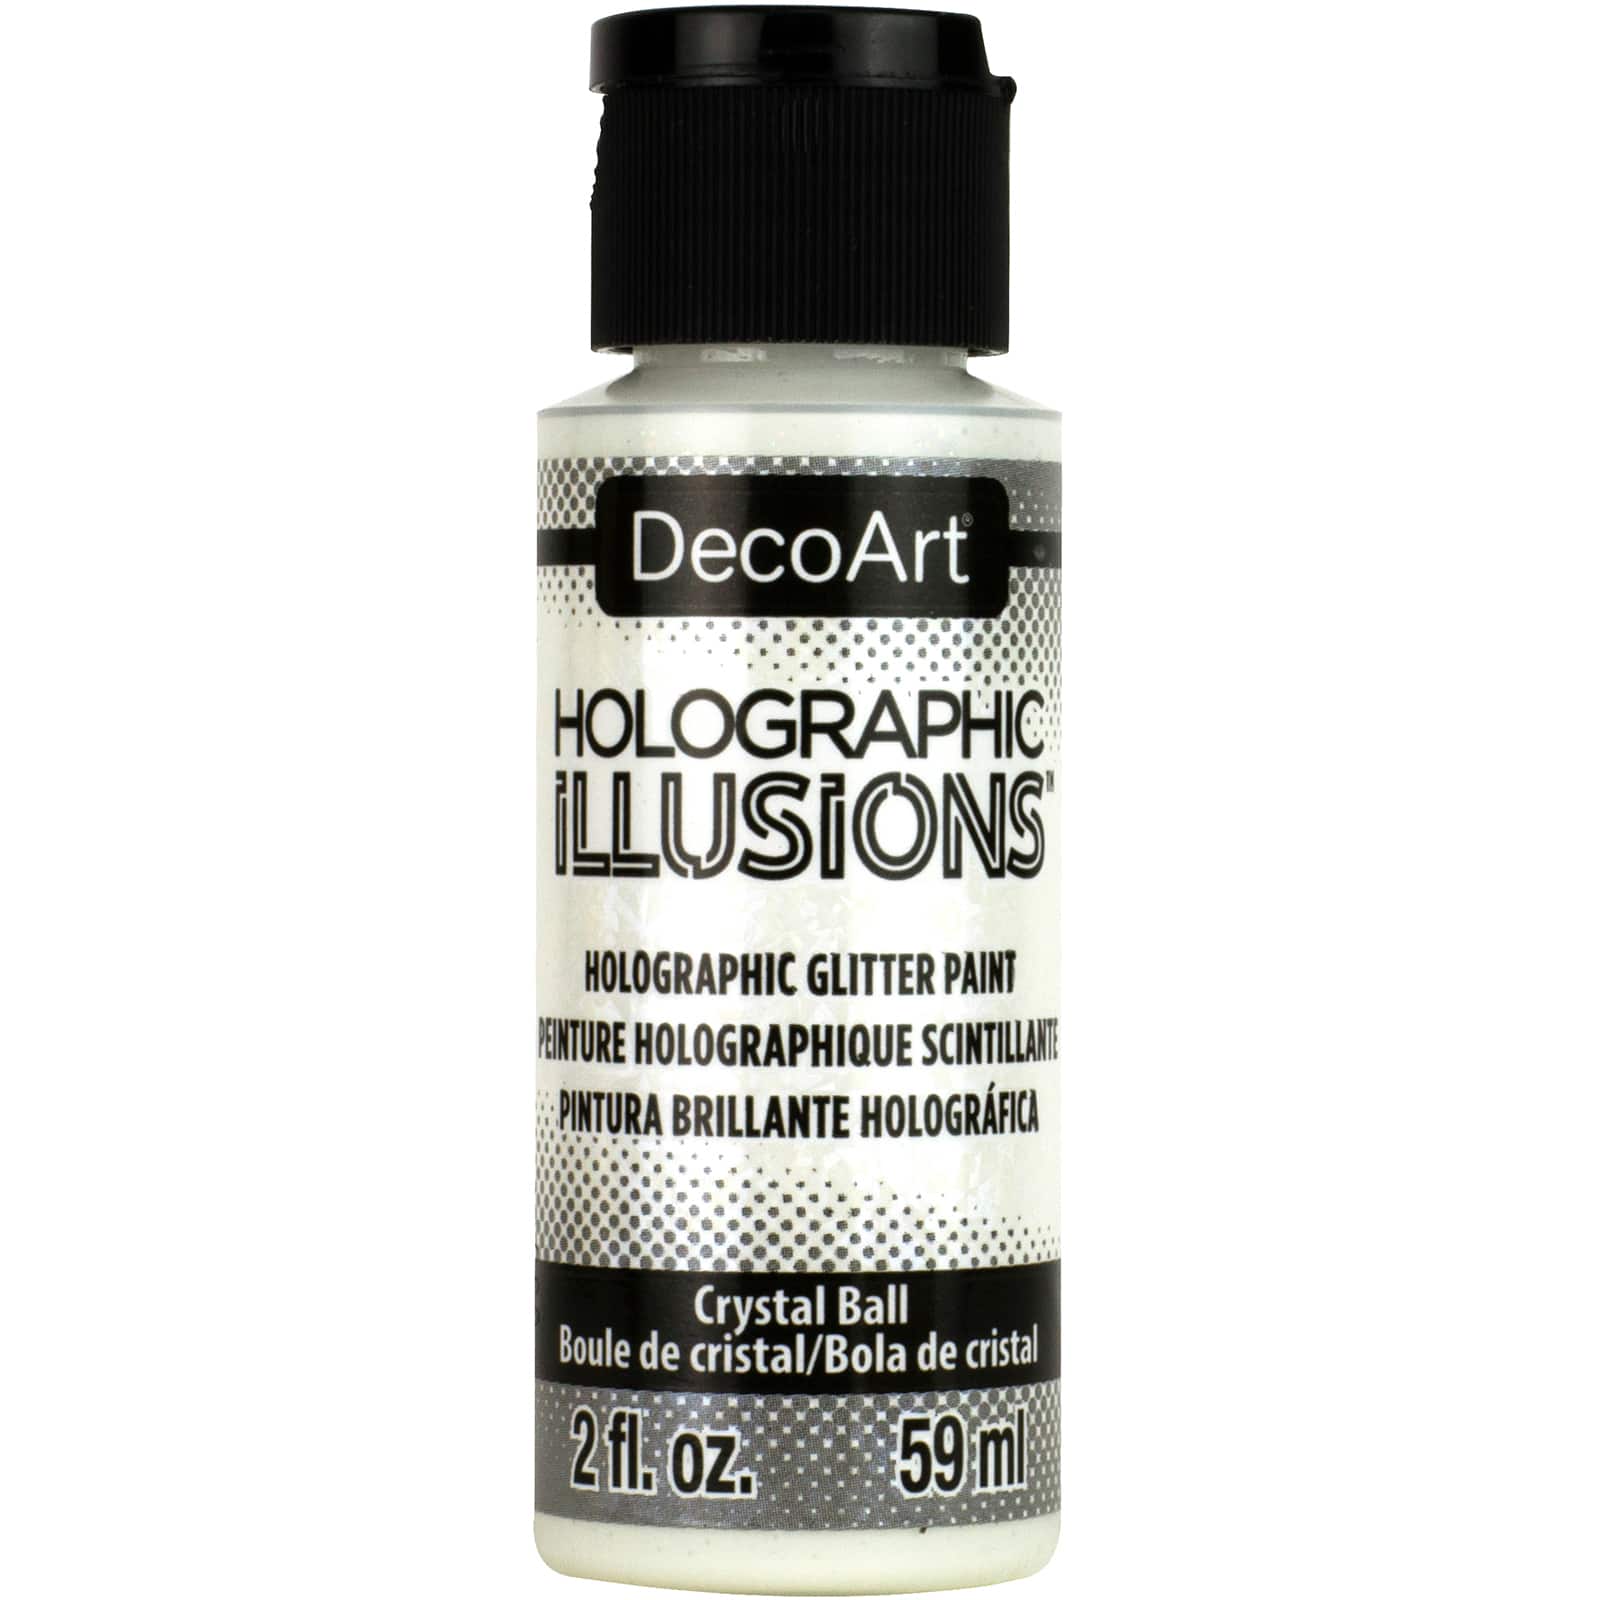 Decoart Holographic Illusions Paint 2oz Crystal Ball